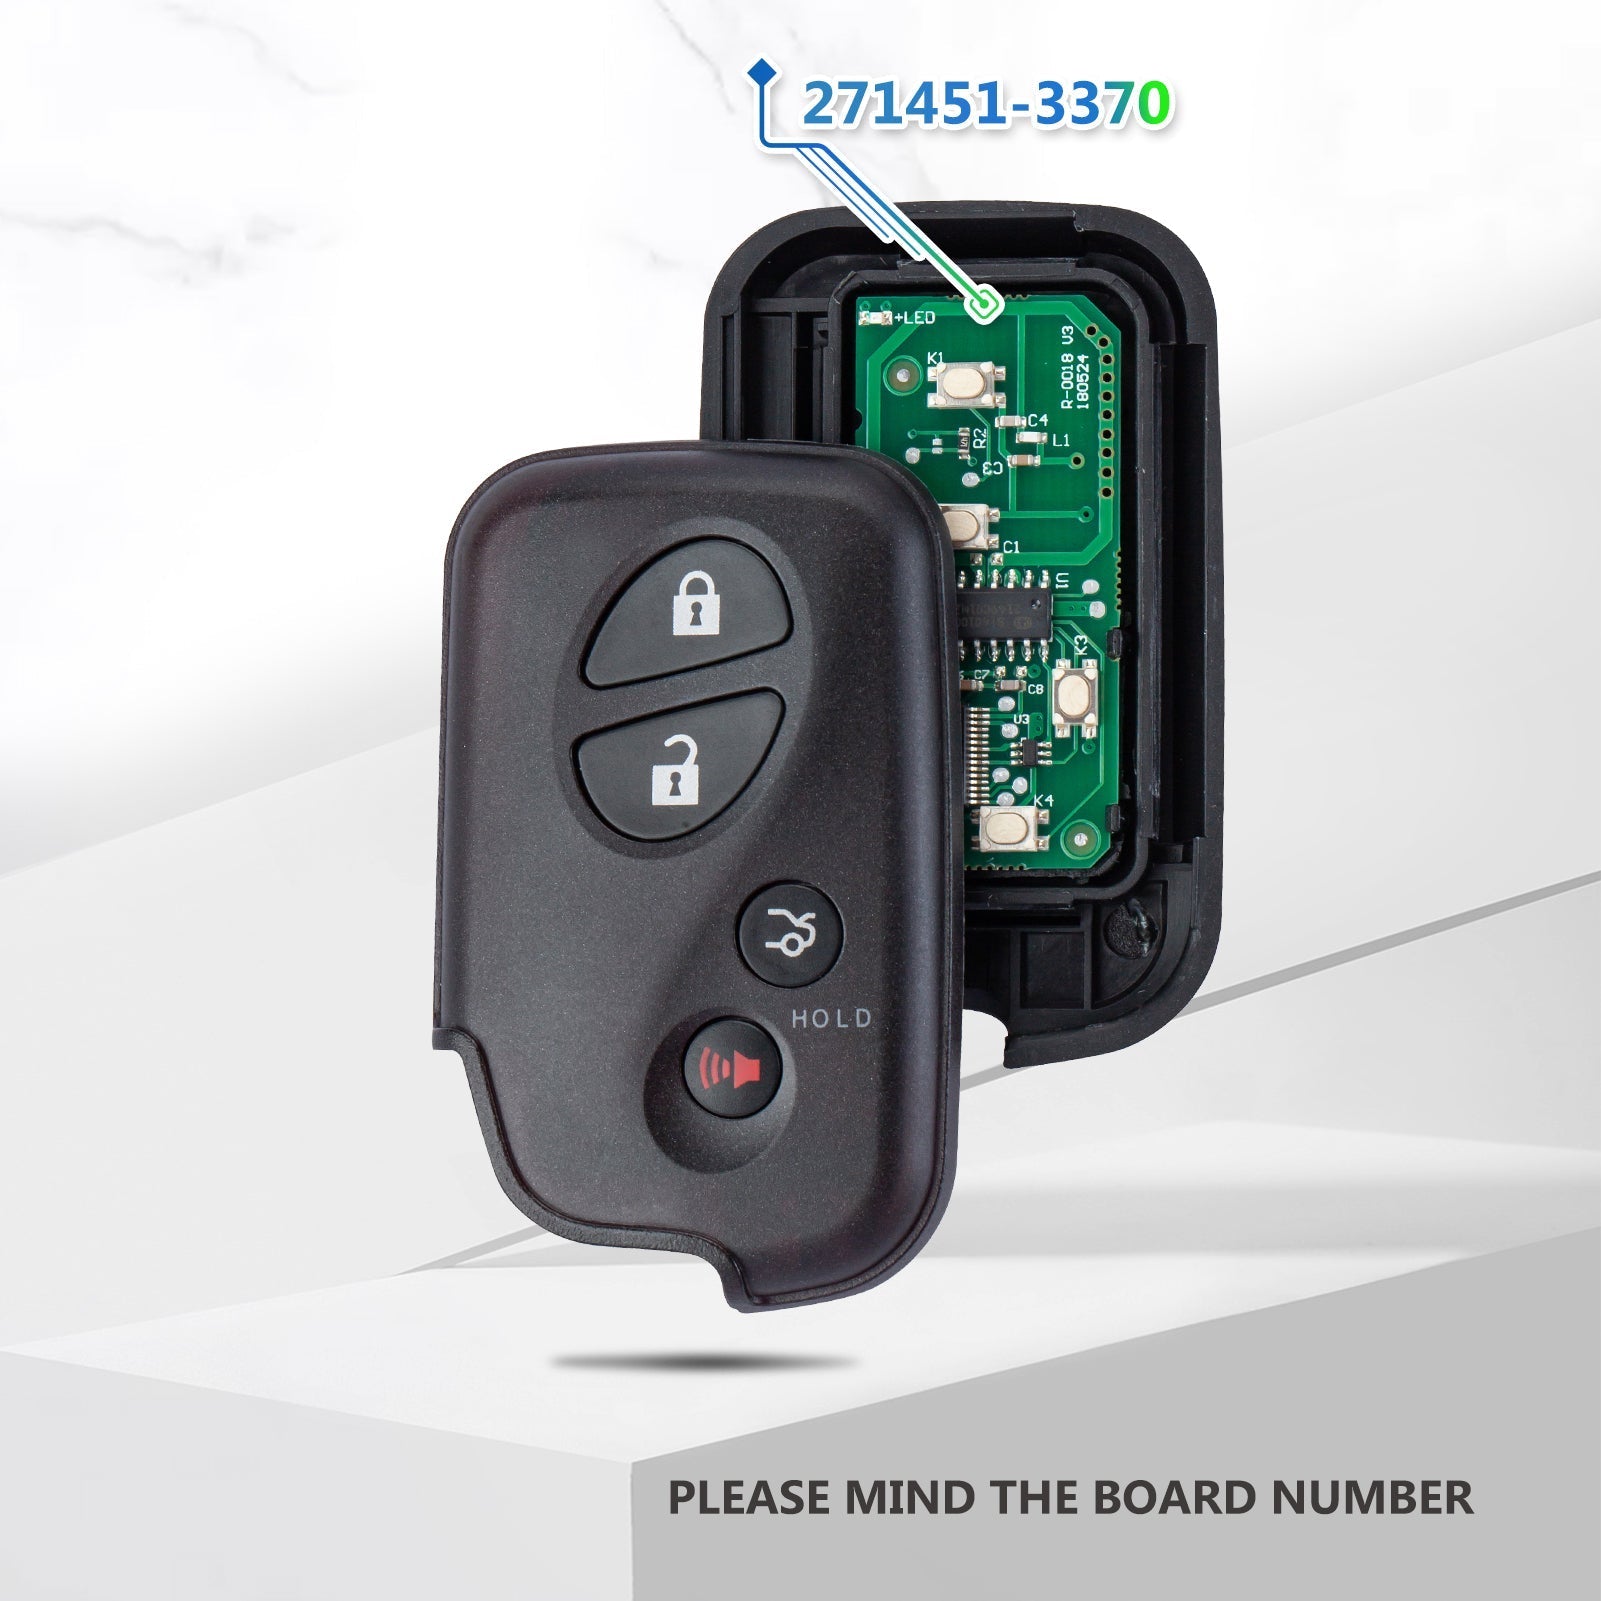 Smart car Key fob Replacement for ES is GS LS 2009-2012 Keyless Fob with FCC ID: HYQ14AAB 3370 Board